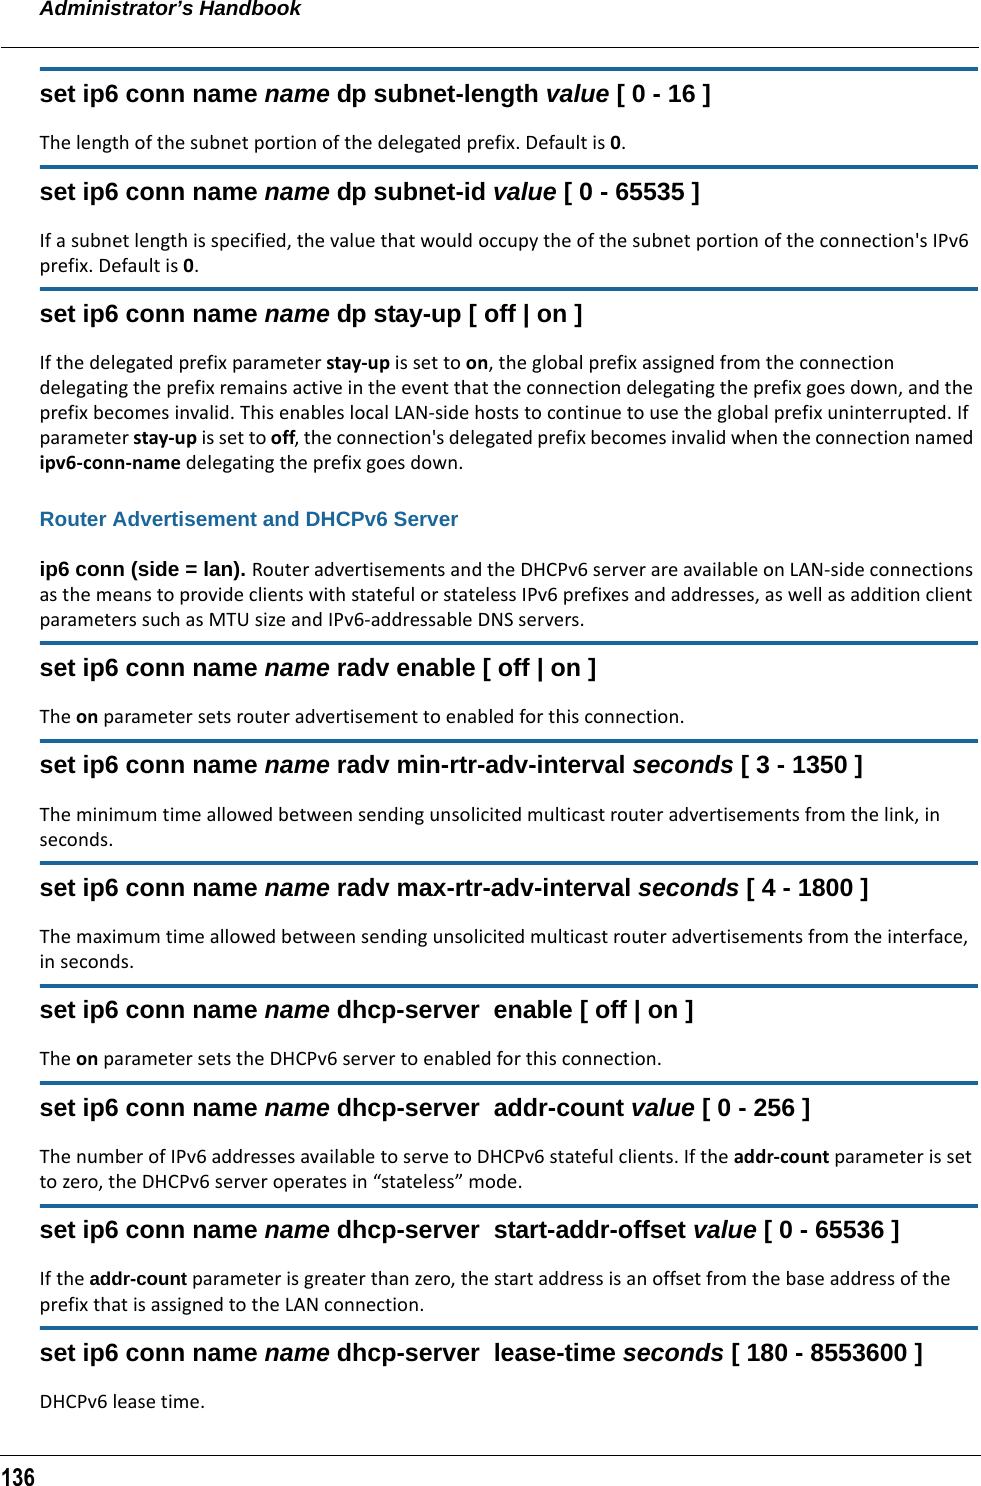 Administrator’s Handbook136set ip6 conn name name dp subnet-length value [ 0 - 16 ]The length of the subnet portion of the delegated prefix. Default is 0.set ip6 conn name name dp subnet-id value [ 0 - 65535 ]If a subnet length is specified, the value that would occupy the of the subnet portion of the connection&apos;s IPv6 prefix. Default is 0.set ip6 conn name name dp stay-up [ off | on ]If the delegated prefix parameter stay-up is set to on, the global prefix assigned from the connection delegating the prefix remains active in the event that the connection delegating the prefix goes down, and the prefix becomes invalid. This enables local LAN-side hosts to continue to use the global prefix uninterrupted. If parameter stay-up is set to off, the connection&apos;s delegated prefix becomes invalid when the connection named ipv6-conn-name delegating the prefix goes down.Router Advertisement and DHCPv6 Serverip6 conn (side = lan). Router advertisements and the DHCPv6 server are available on LAN-side connections as the means to provide clients with stateful or stateless IPv6 prefixes and addresses, as well as addition client parameters such as MTU size and IPv6-addressable DNS servers.set ip6 conn name name radv enable [ off | on ]The on parameter sets router advertisement to enabled for this connection.set ip6 conn name name radv min-rtr-adv-interval seconds [ 3 - 1350 ]The minimum time allowed between sending unsolicited multicast router advertisements from the link, in seconds.set ip6 conn name name radv max-rtr-adv-interval seconds [ 4 - 1800 ]The maximum time allowed between sending unsolicited multicast router advertisements from the interface, in seconds. set ip6 conn name name dhcp-server  enable [ off | on ]The on parameter sets the DHCPv6 server to enabled for this connection.set ip6 conn name name dhcp-server  addr-count value [ 0 - 256 ]The number of IPv6 addresses available to serve to DHCPv6 stateful clients. If the addr-count parameter is set to zero, the DHCPv6 server operates in “stateless” mode.set ip6 conn name name dhcp-server  start-addr-offset value [ 0 - 65536 ]If the addr-count parameter is greater than zero, the start address is an offset from the base address of the prefix that is assigned to the LAN connection.set ip6 conn name name dhcp-server  lease-time seconds [ 180 - 8553600 ]DHCPv6 lease time.